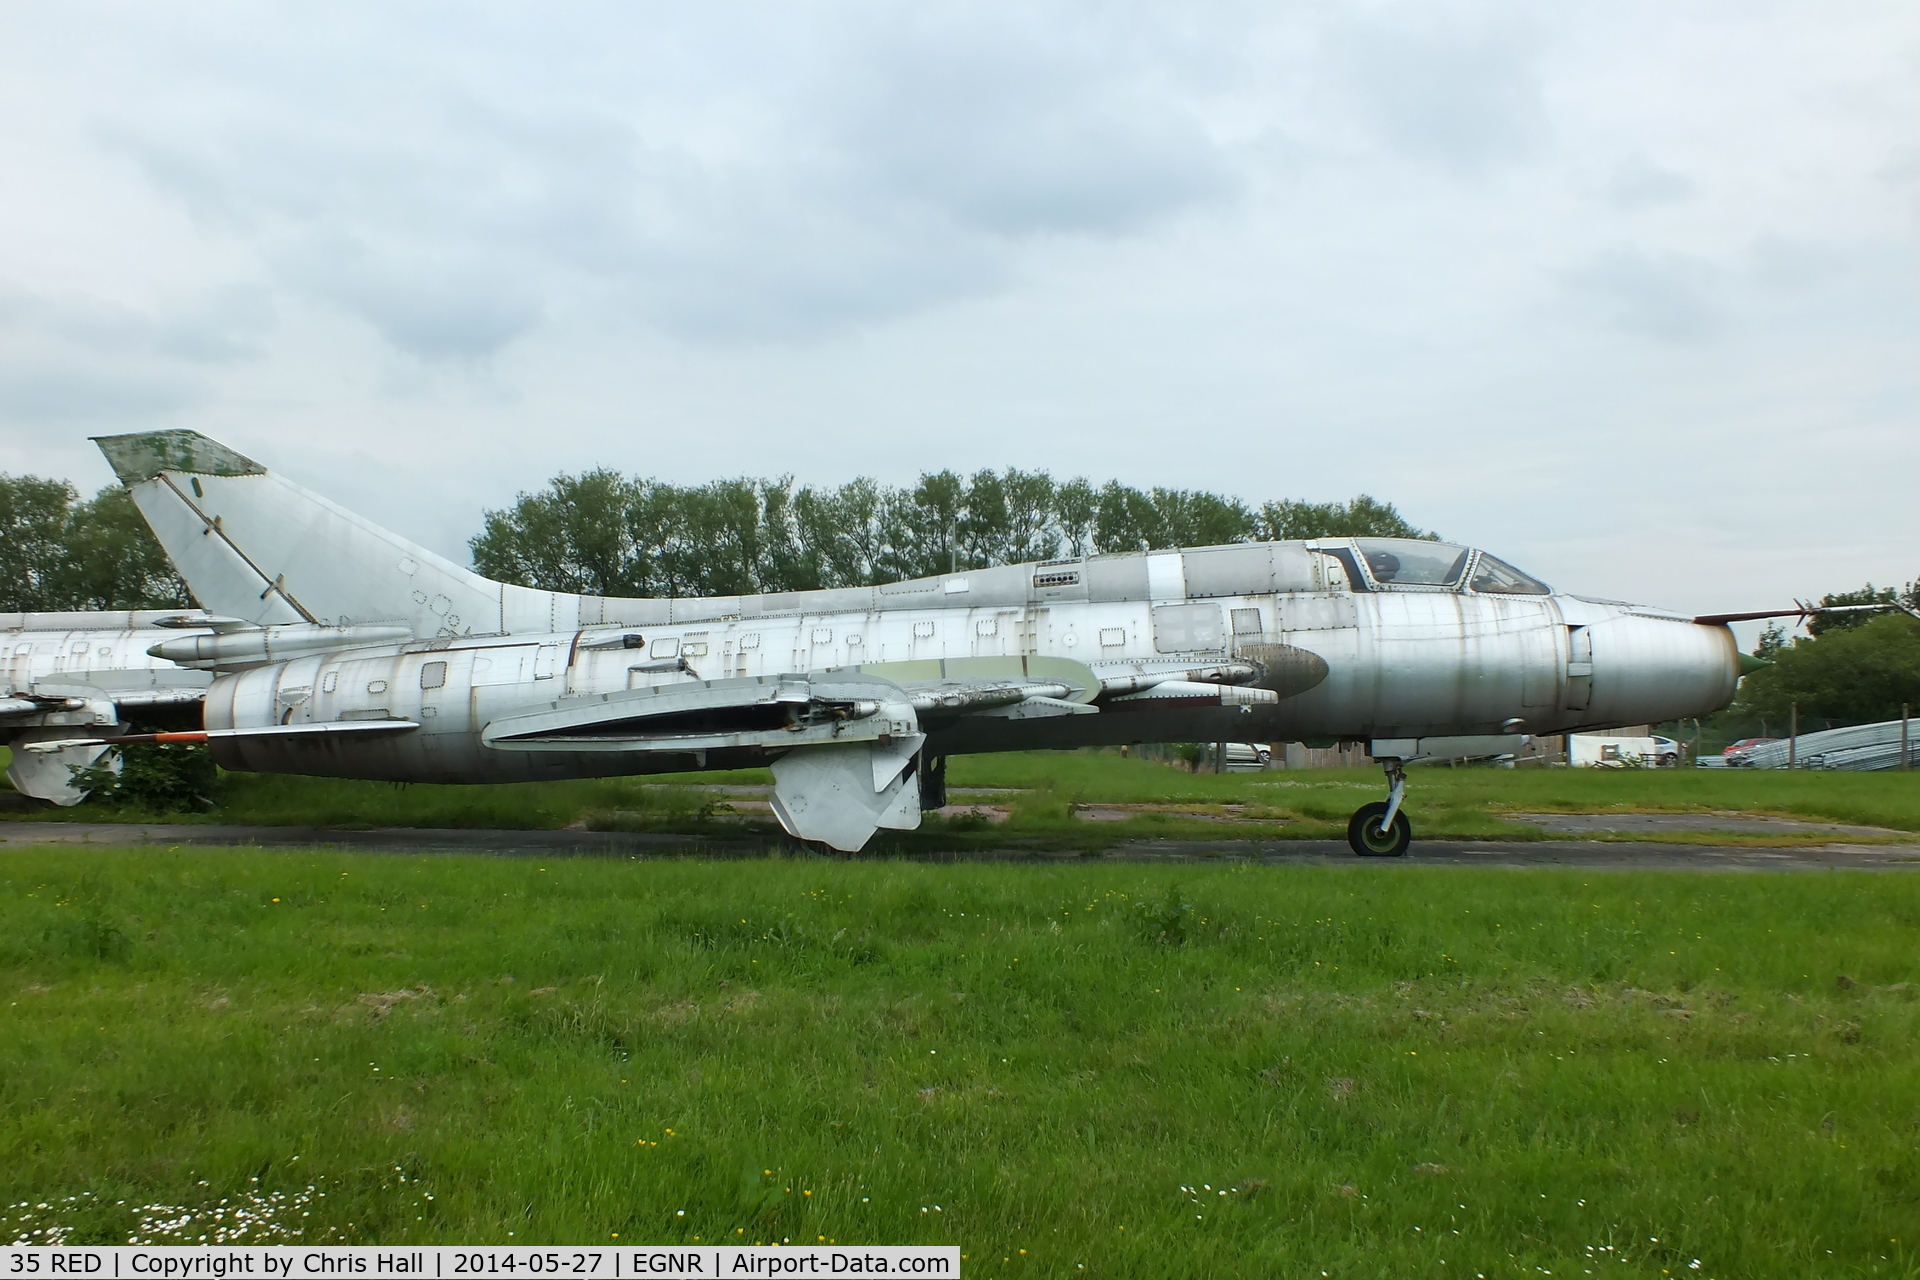 35 RED, Sukhoi Su-17M C/N 25102, stored at Hawarden since 1993